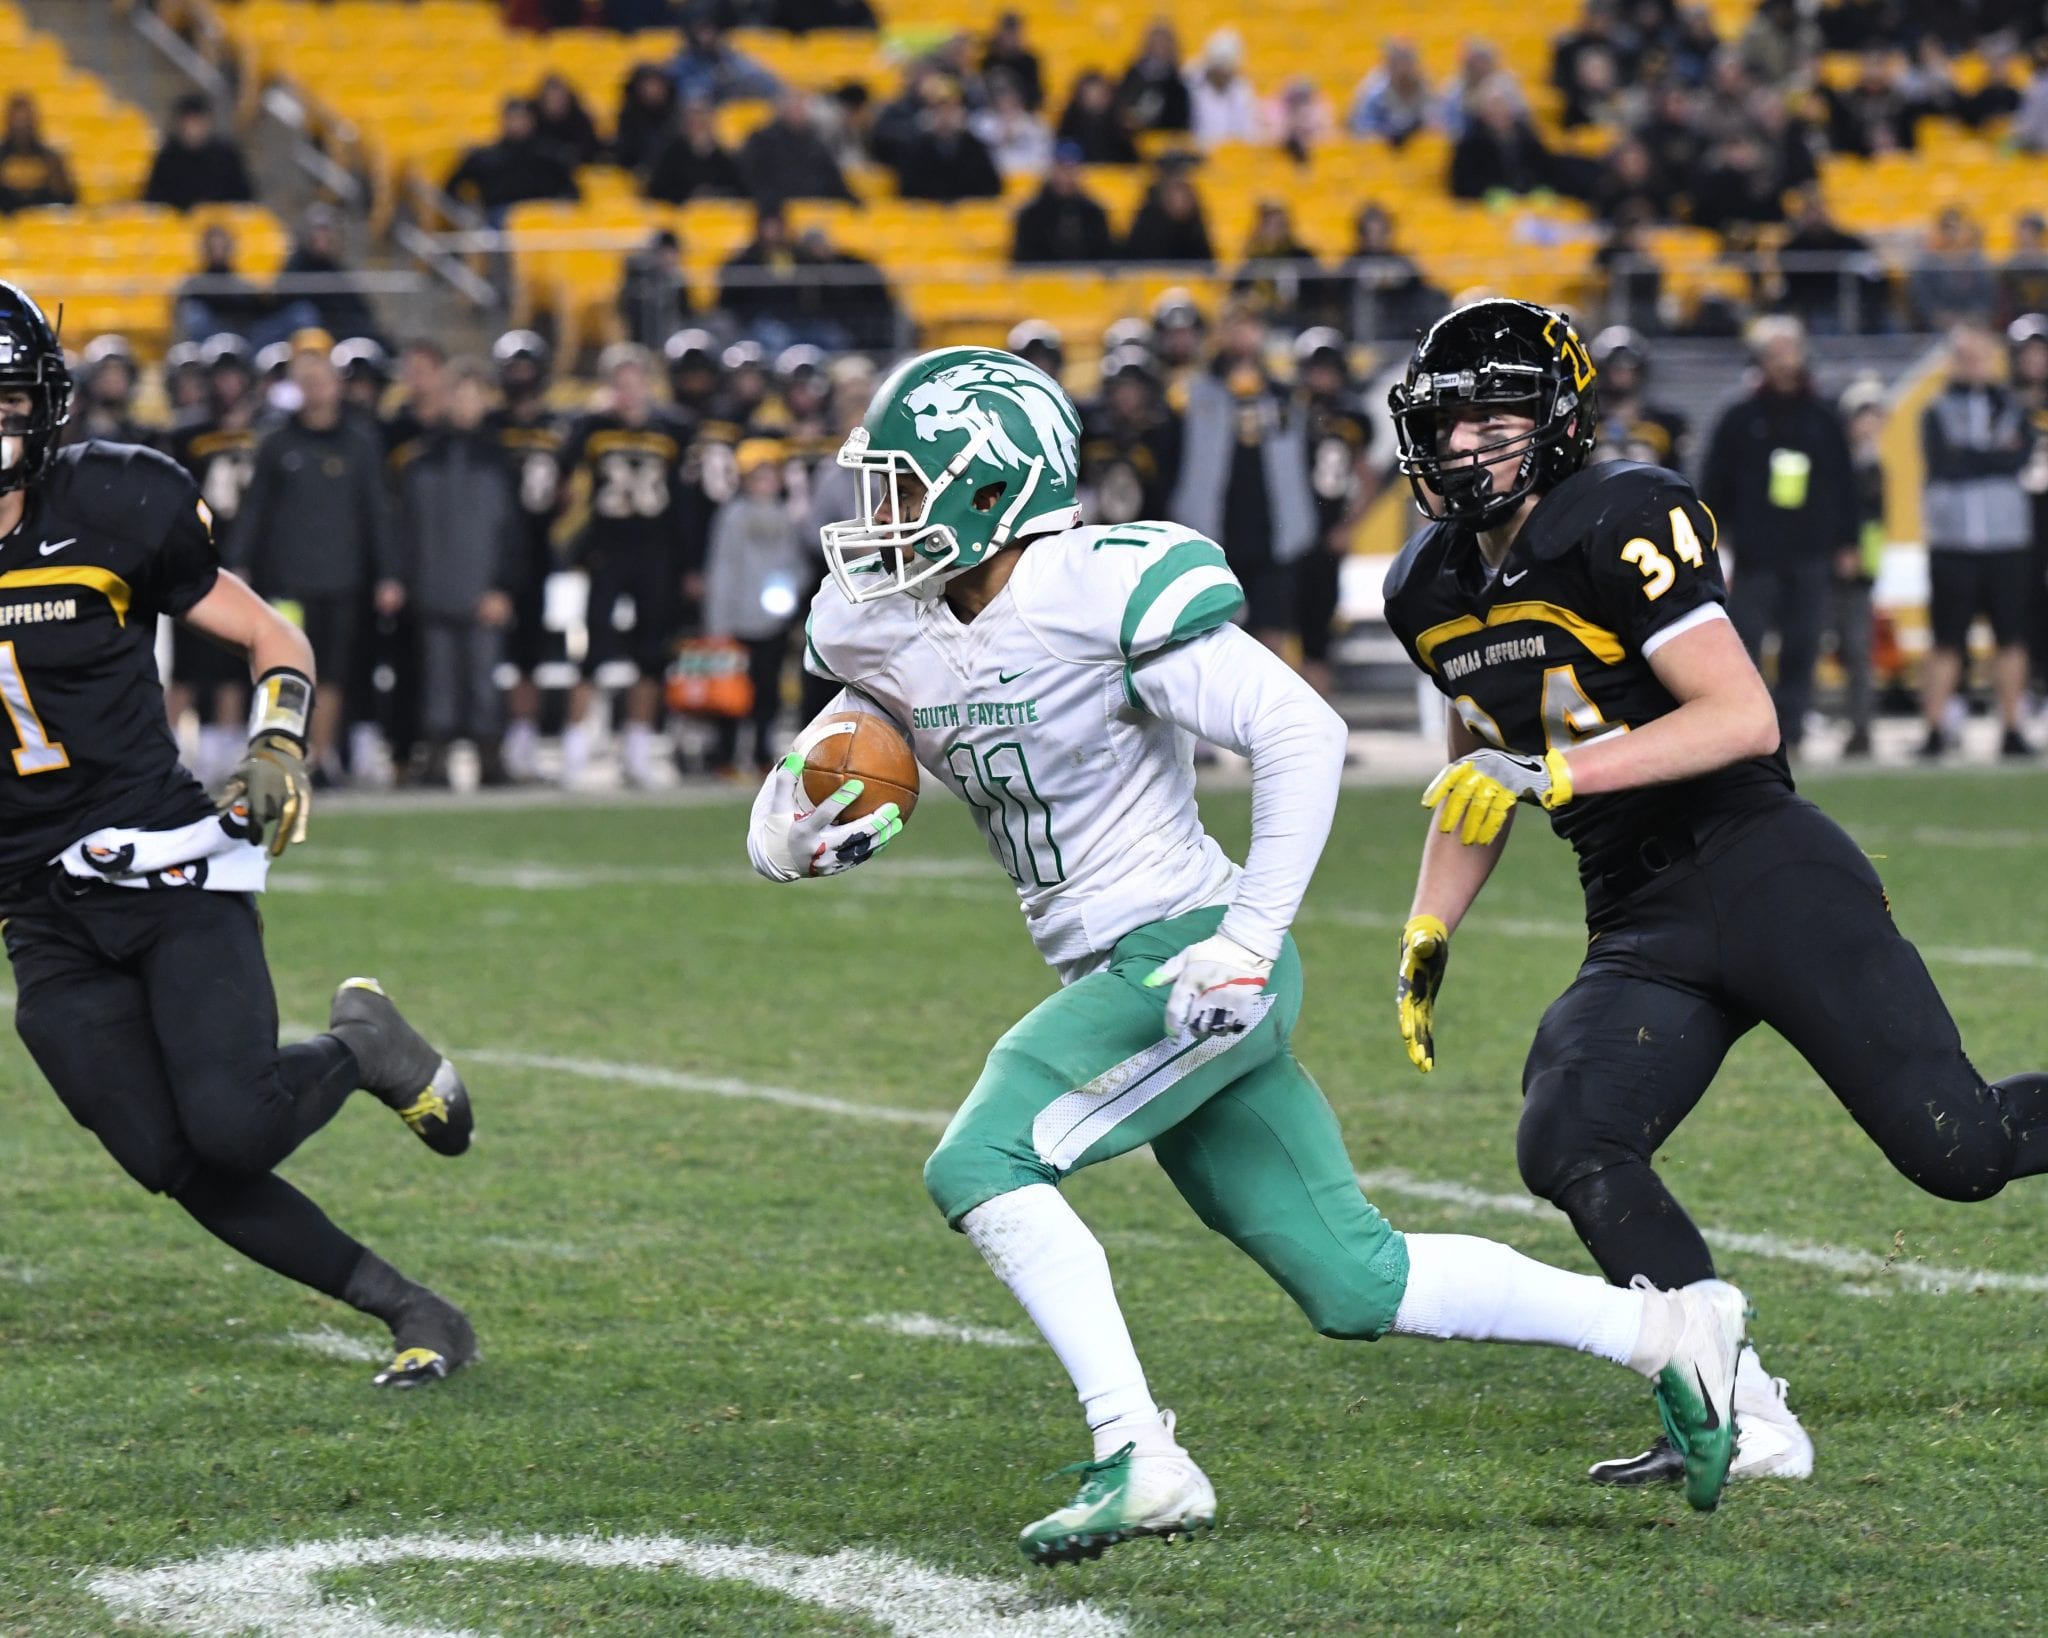 South Fayette Comes from Behind to Snap TJ's Title Streak | Pittsburgh Sports Now2048 x 1638